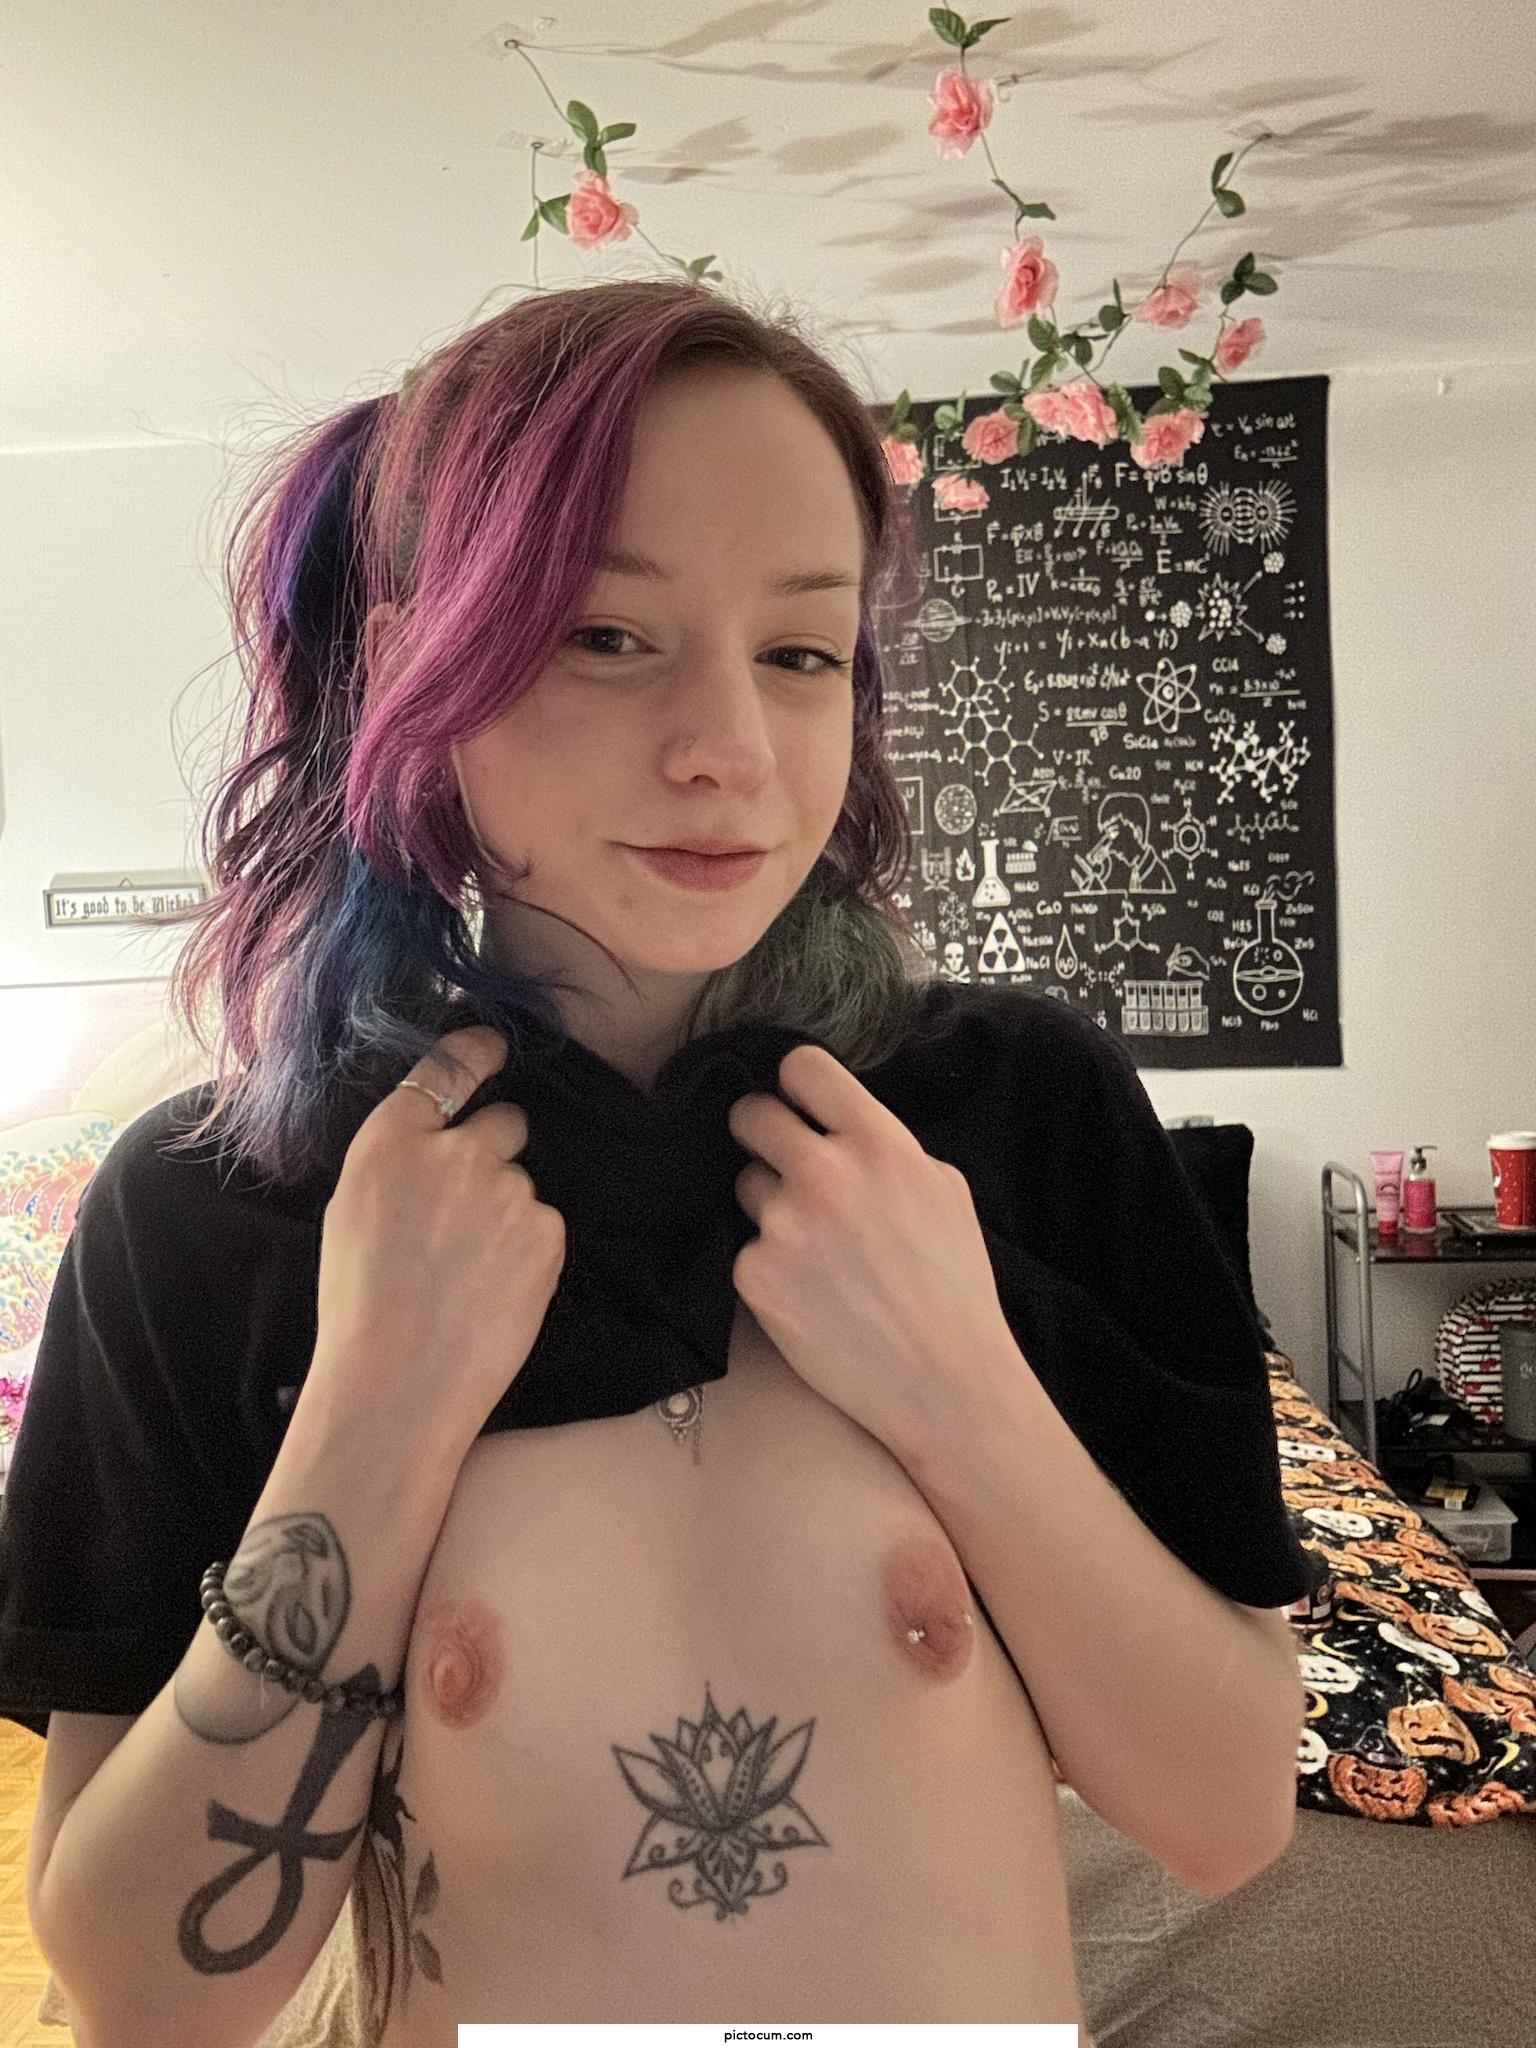 Happy to share my cute tits this morning